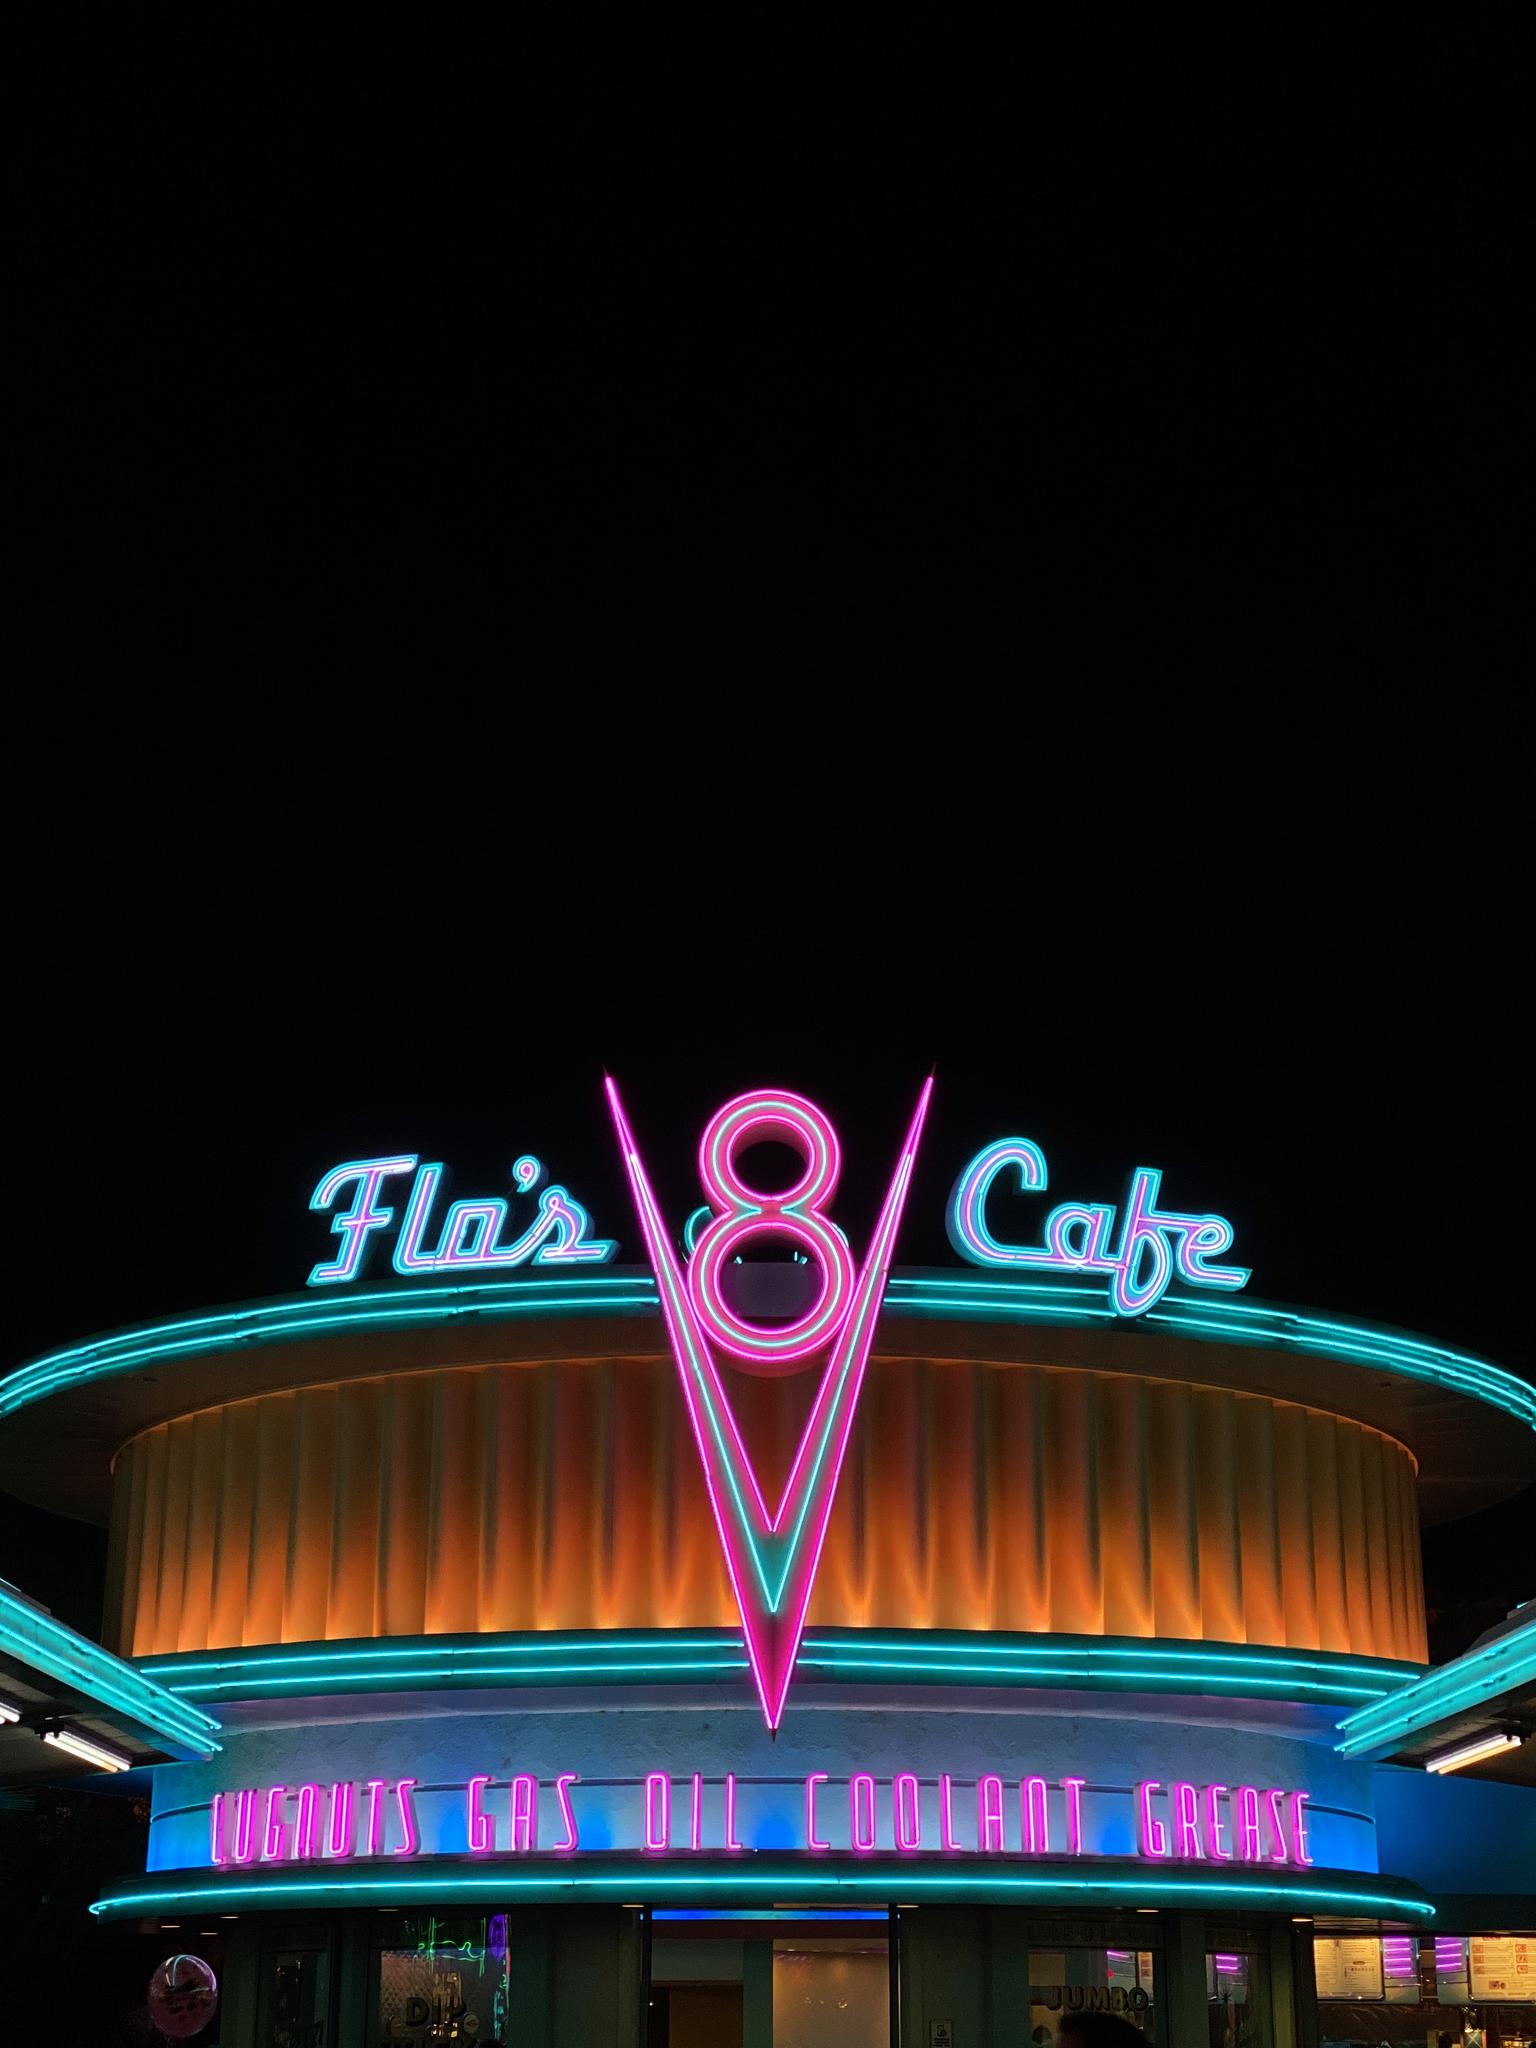 Red green and white flos cafe neon sign photo  Free Neon Image on  Unsplash